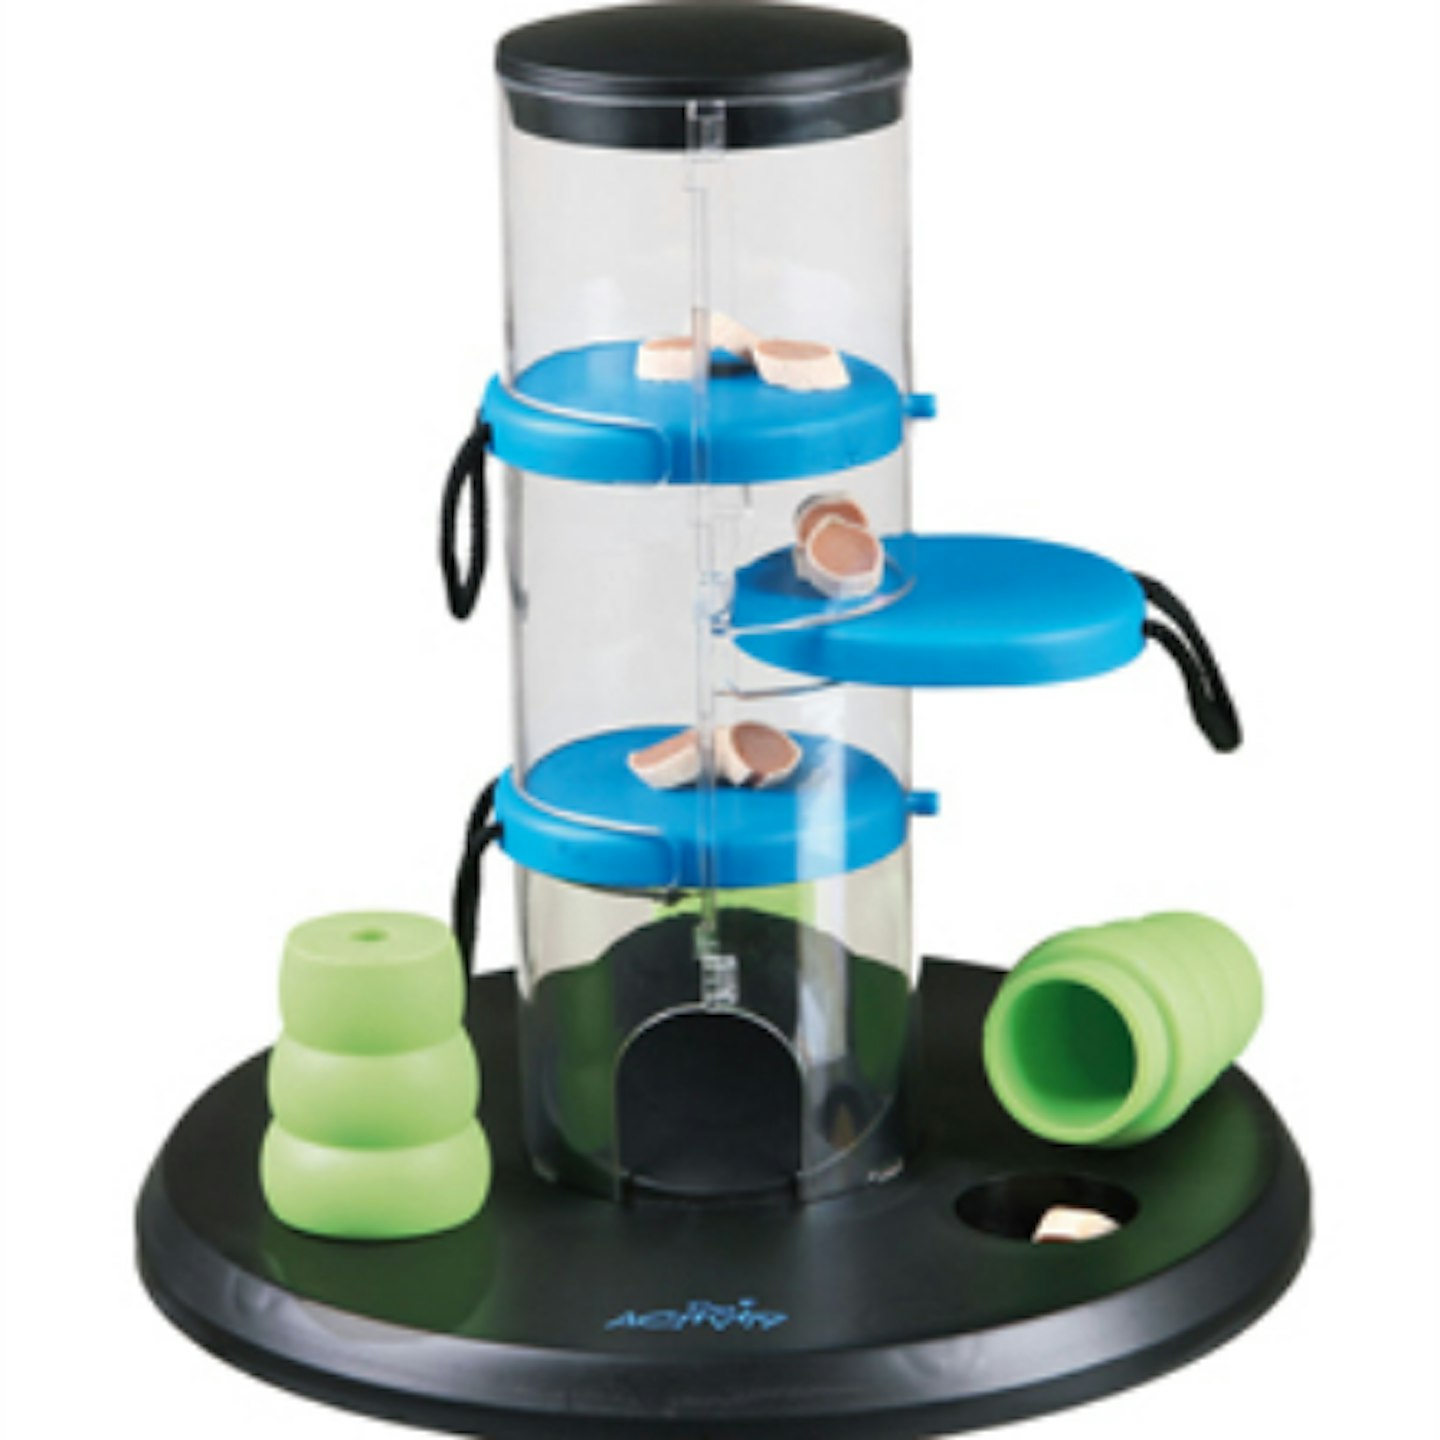 TRIXIE Gambling Tower Activity for Dogs (Level 1) - Blue/White